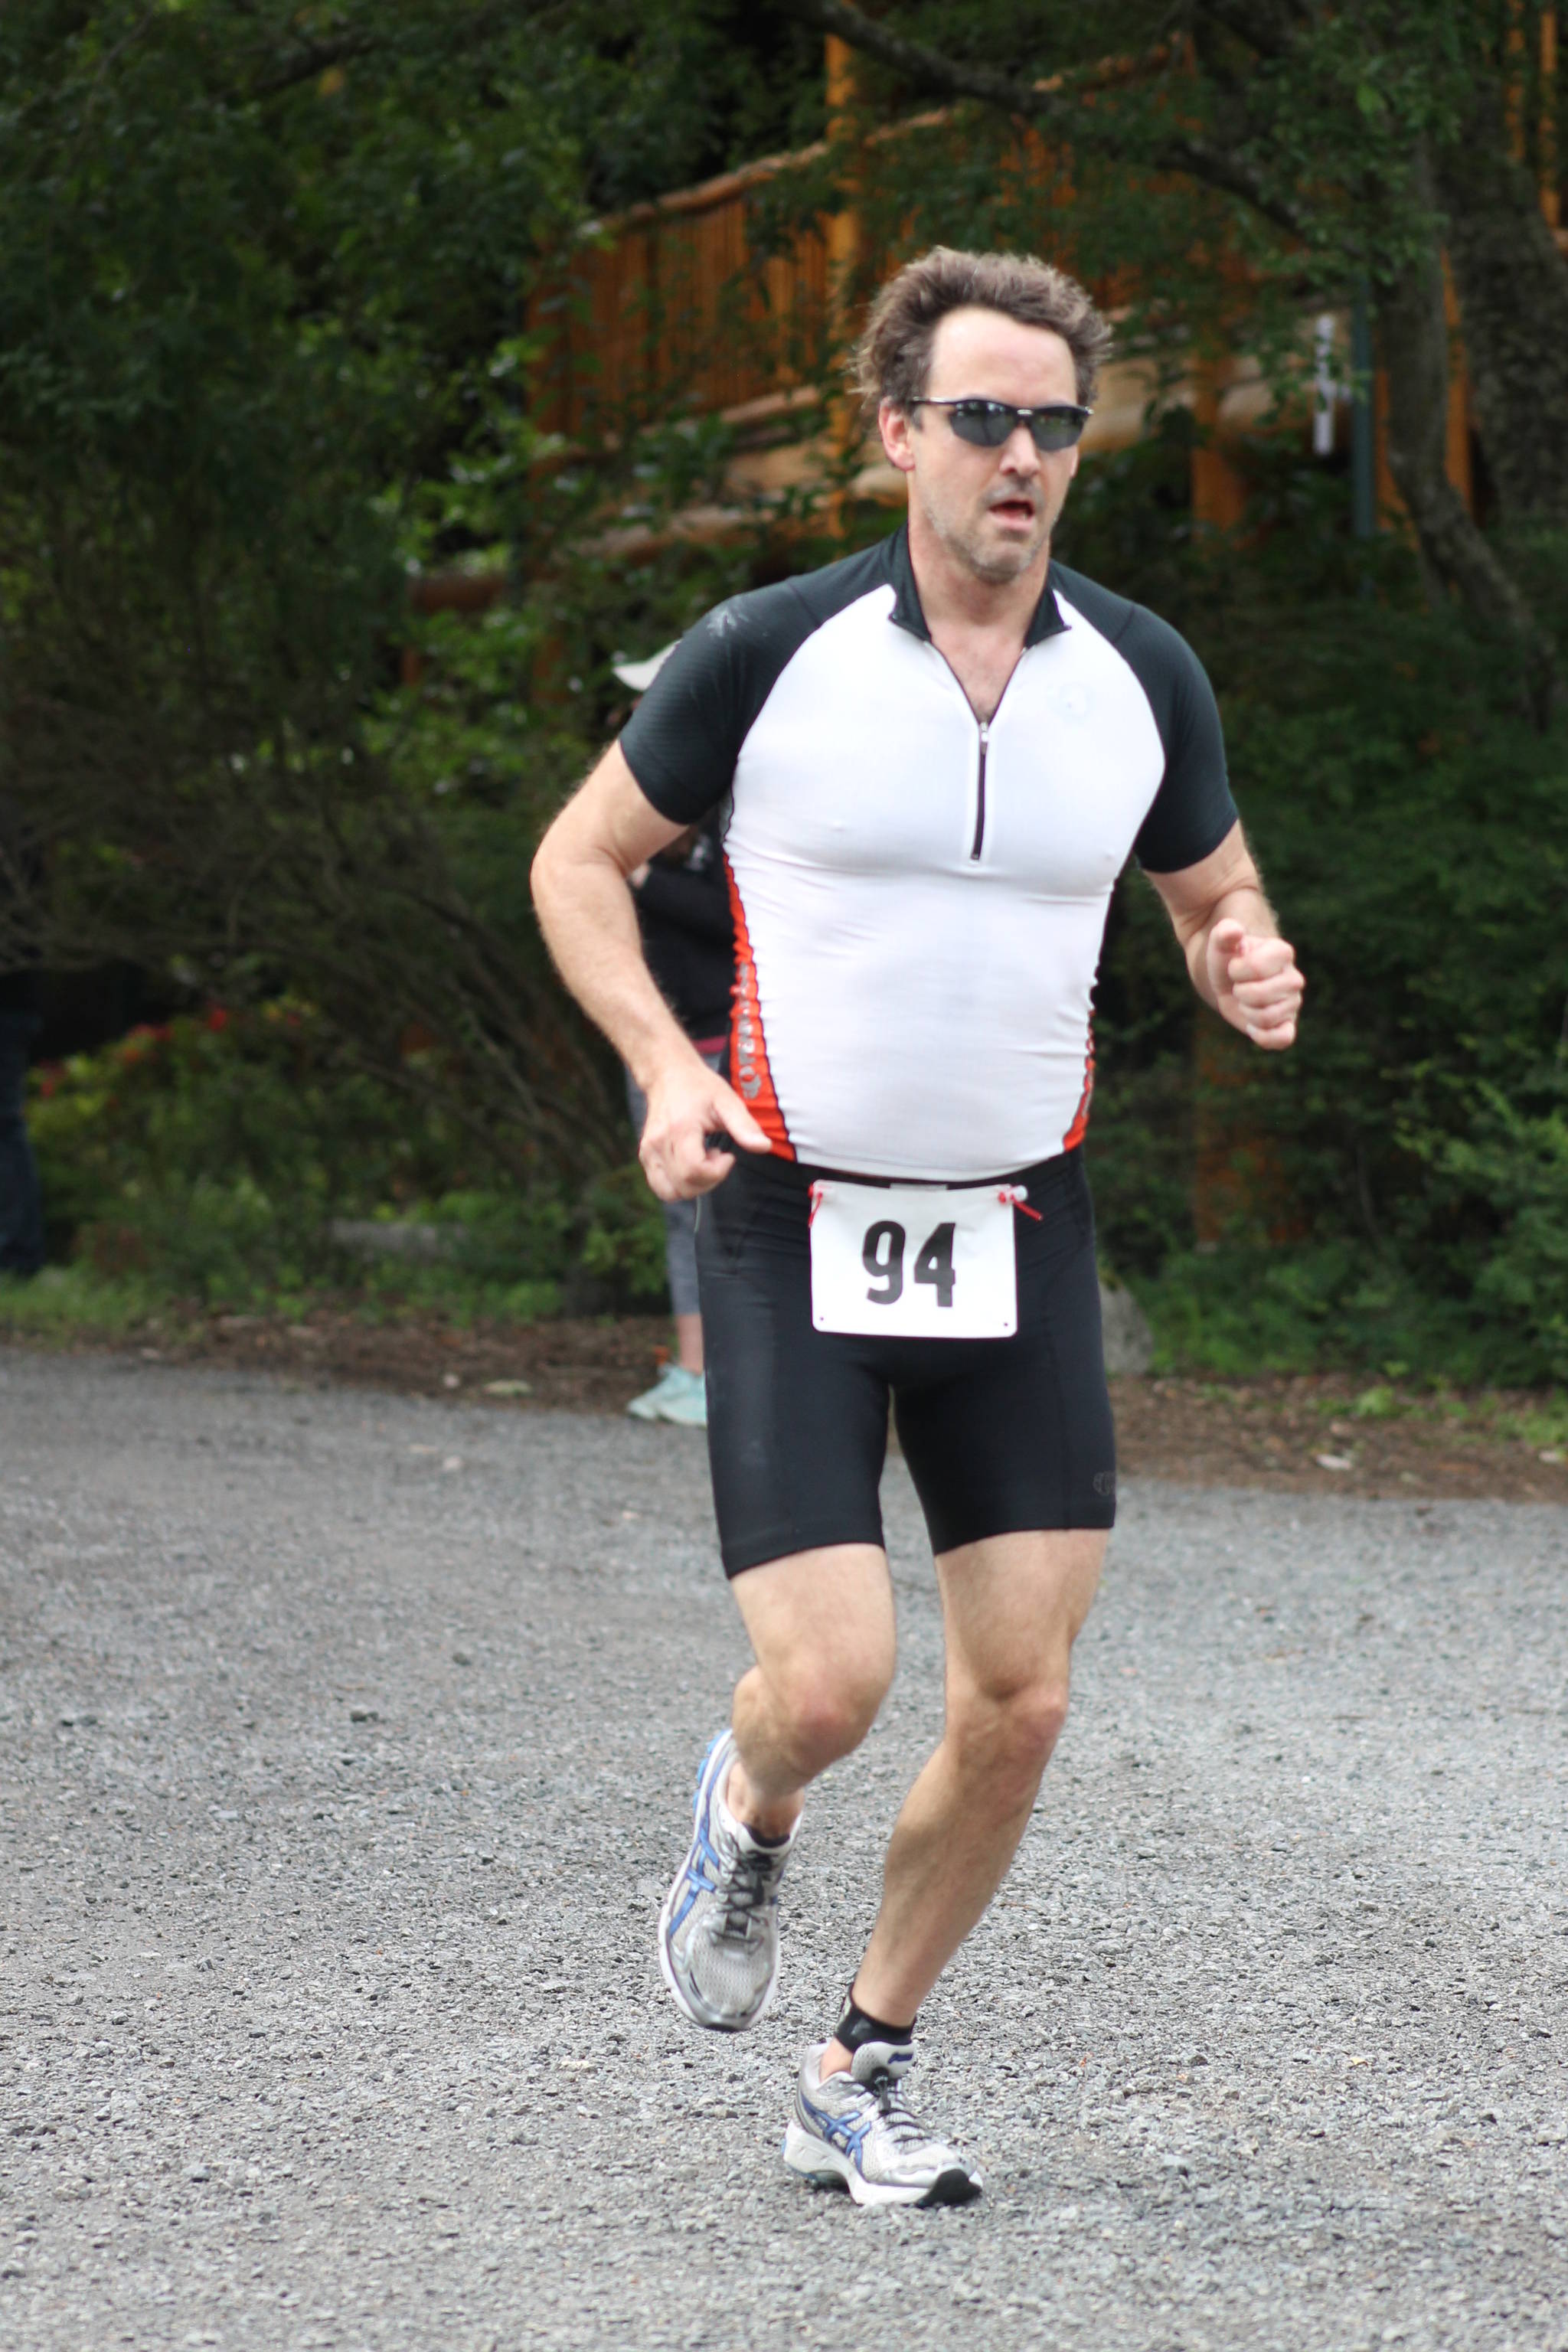 Staff photo, Heather Spaulding. Triathalon Sprint winner Keith Szot approaches the finish line.